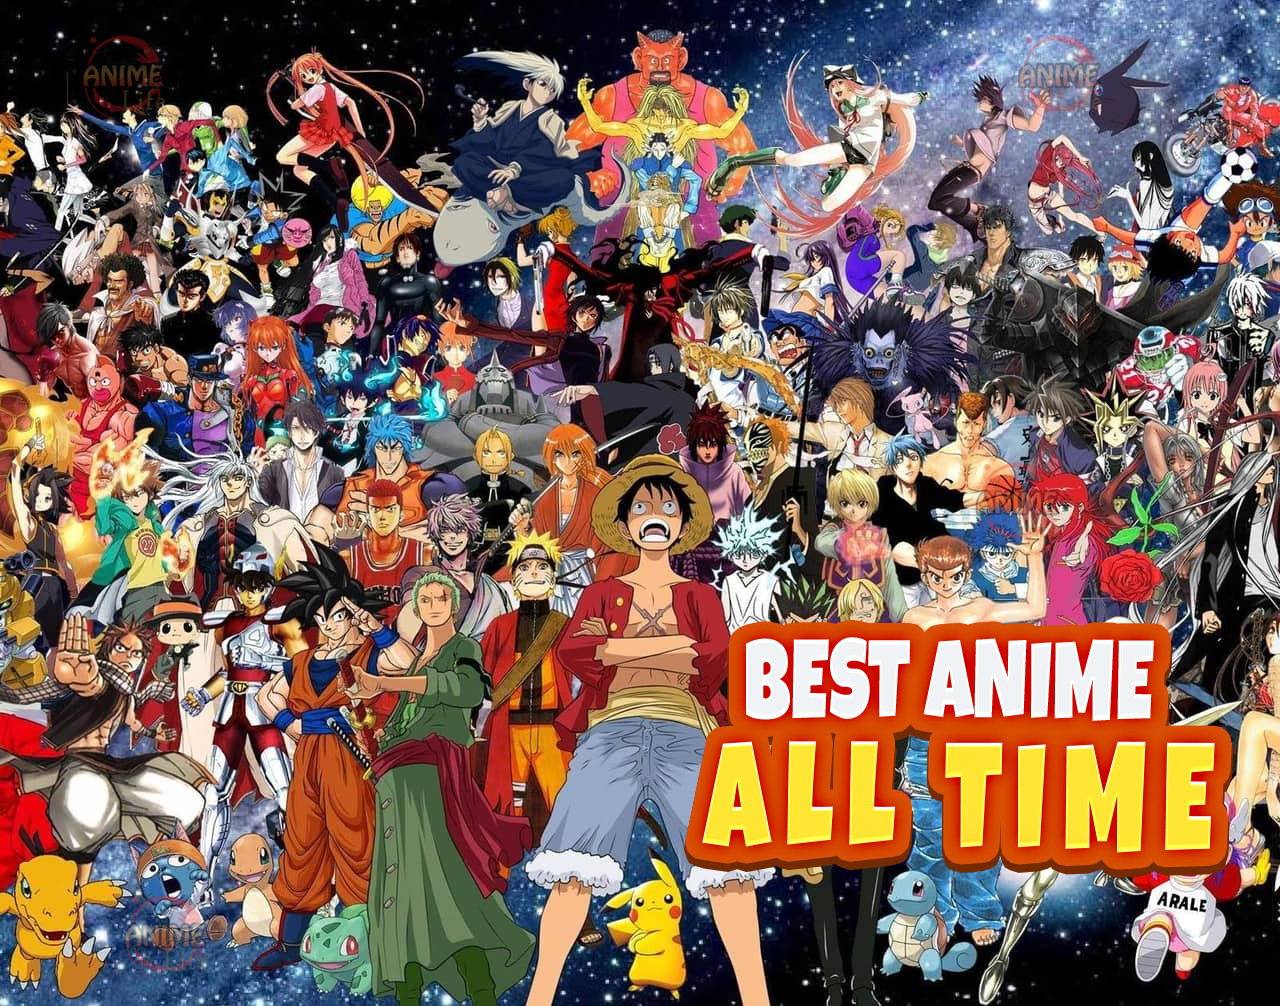 Best Anime Of All Time – Which one is your favorite?